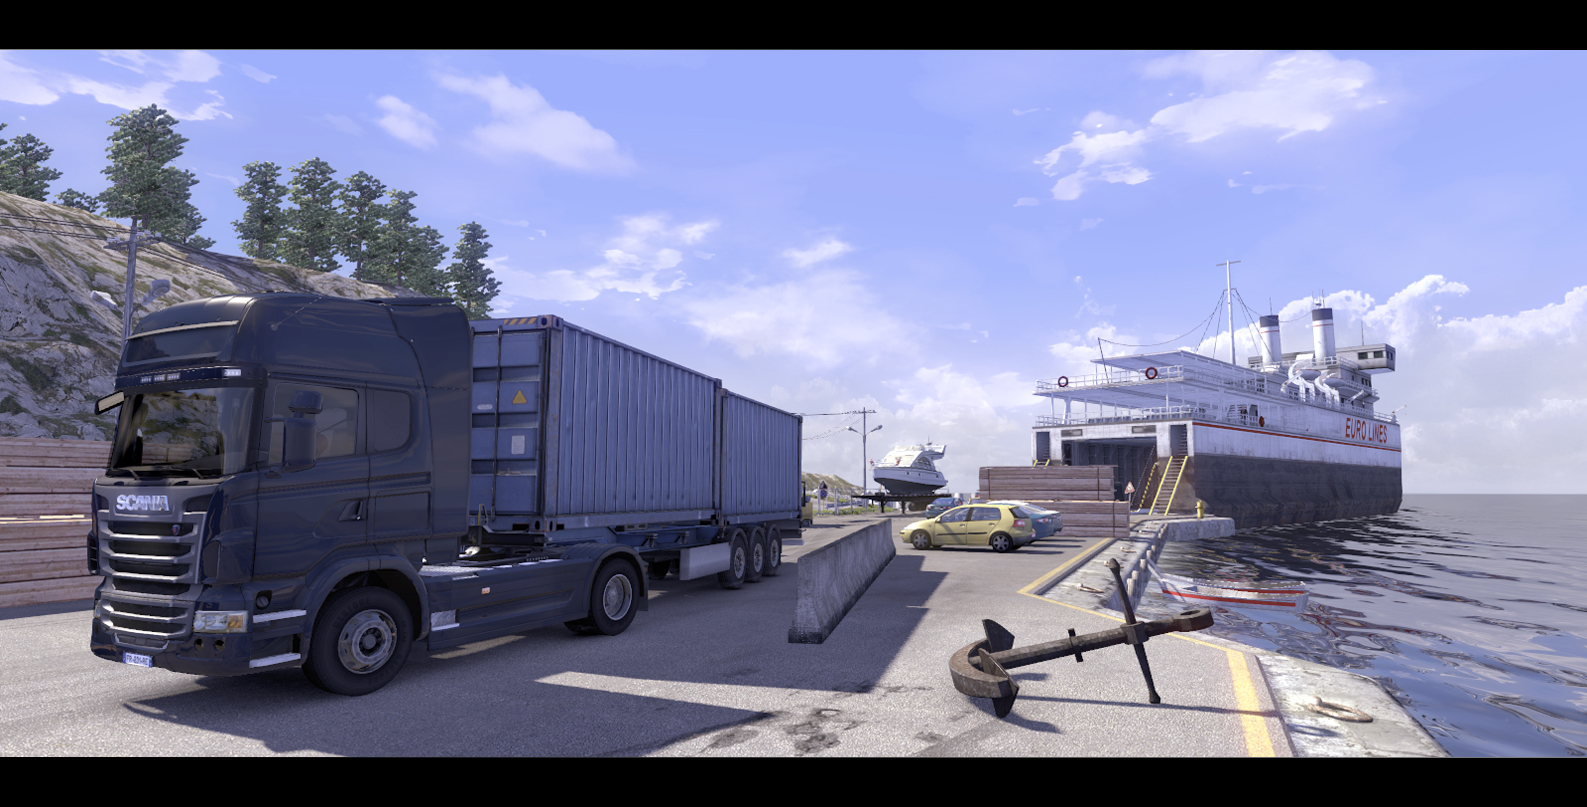 SCS wrote: Almost finished The work on Scania Truck Driving Simulator is al...